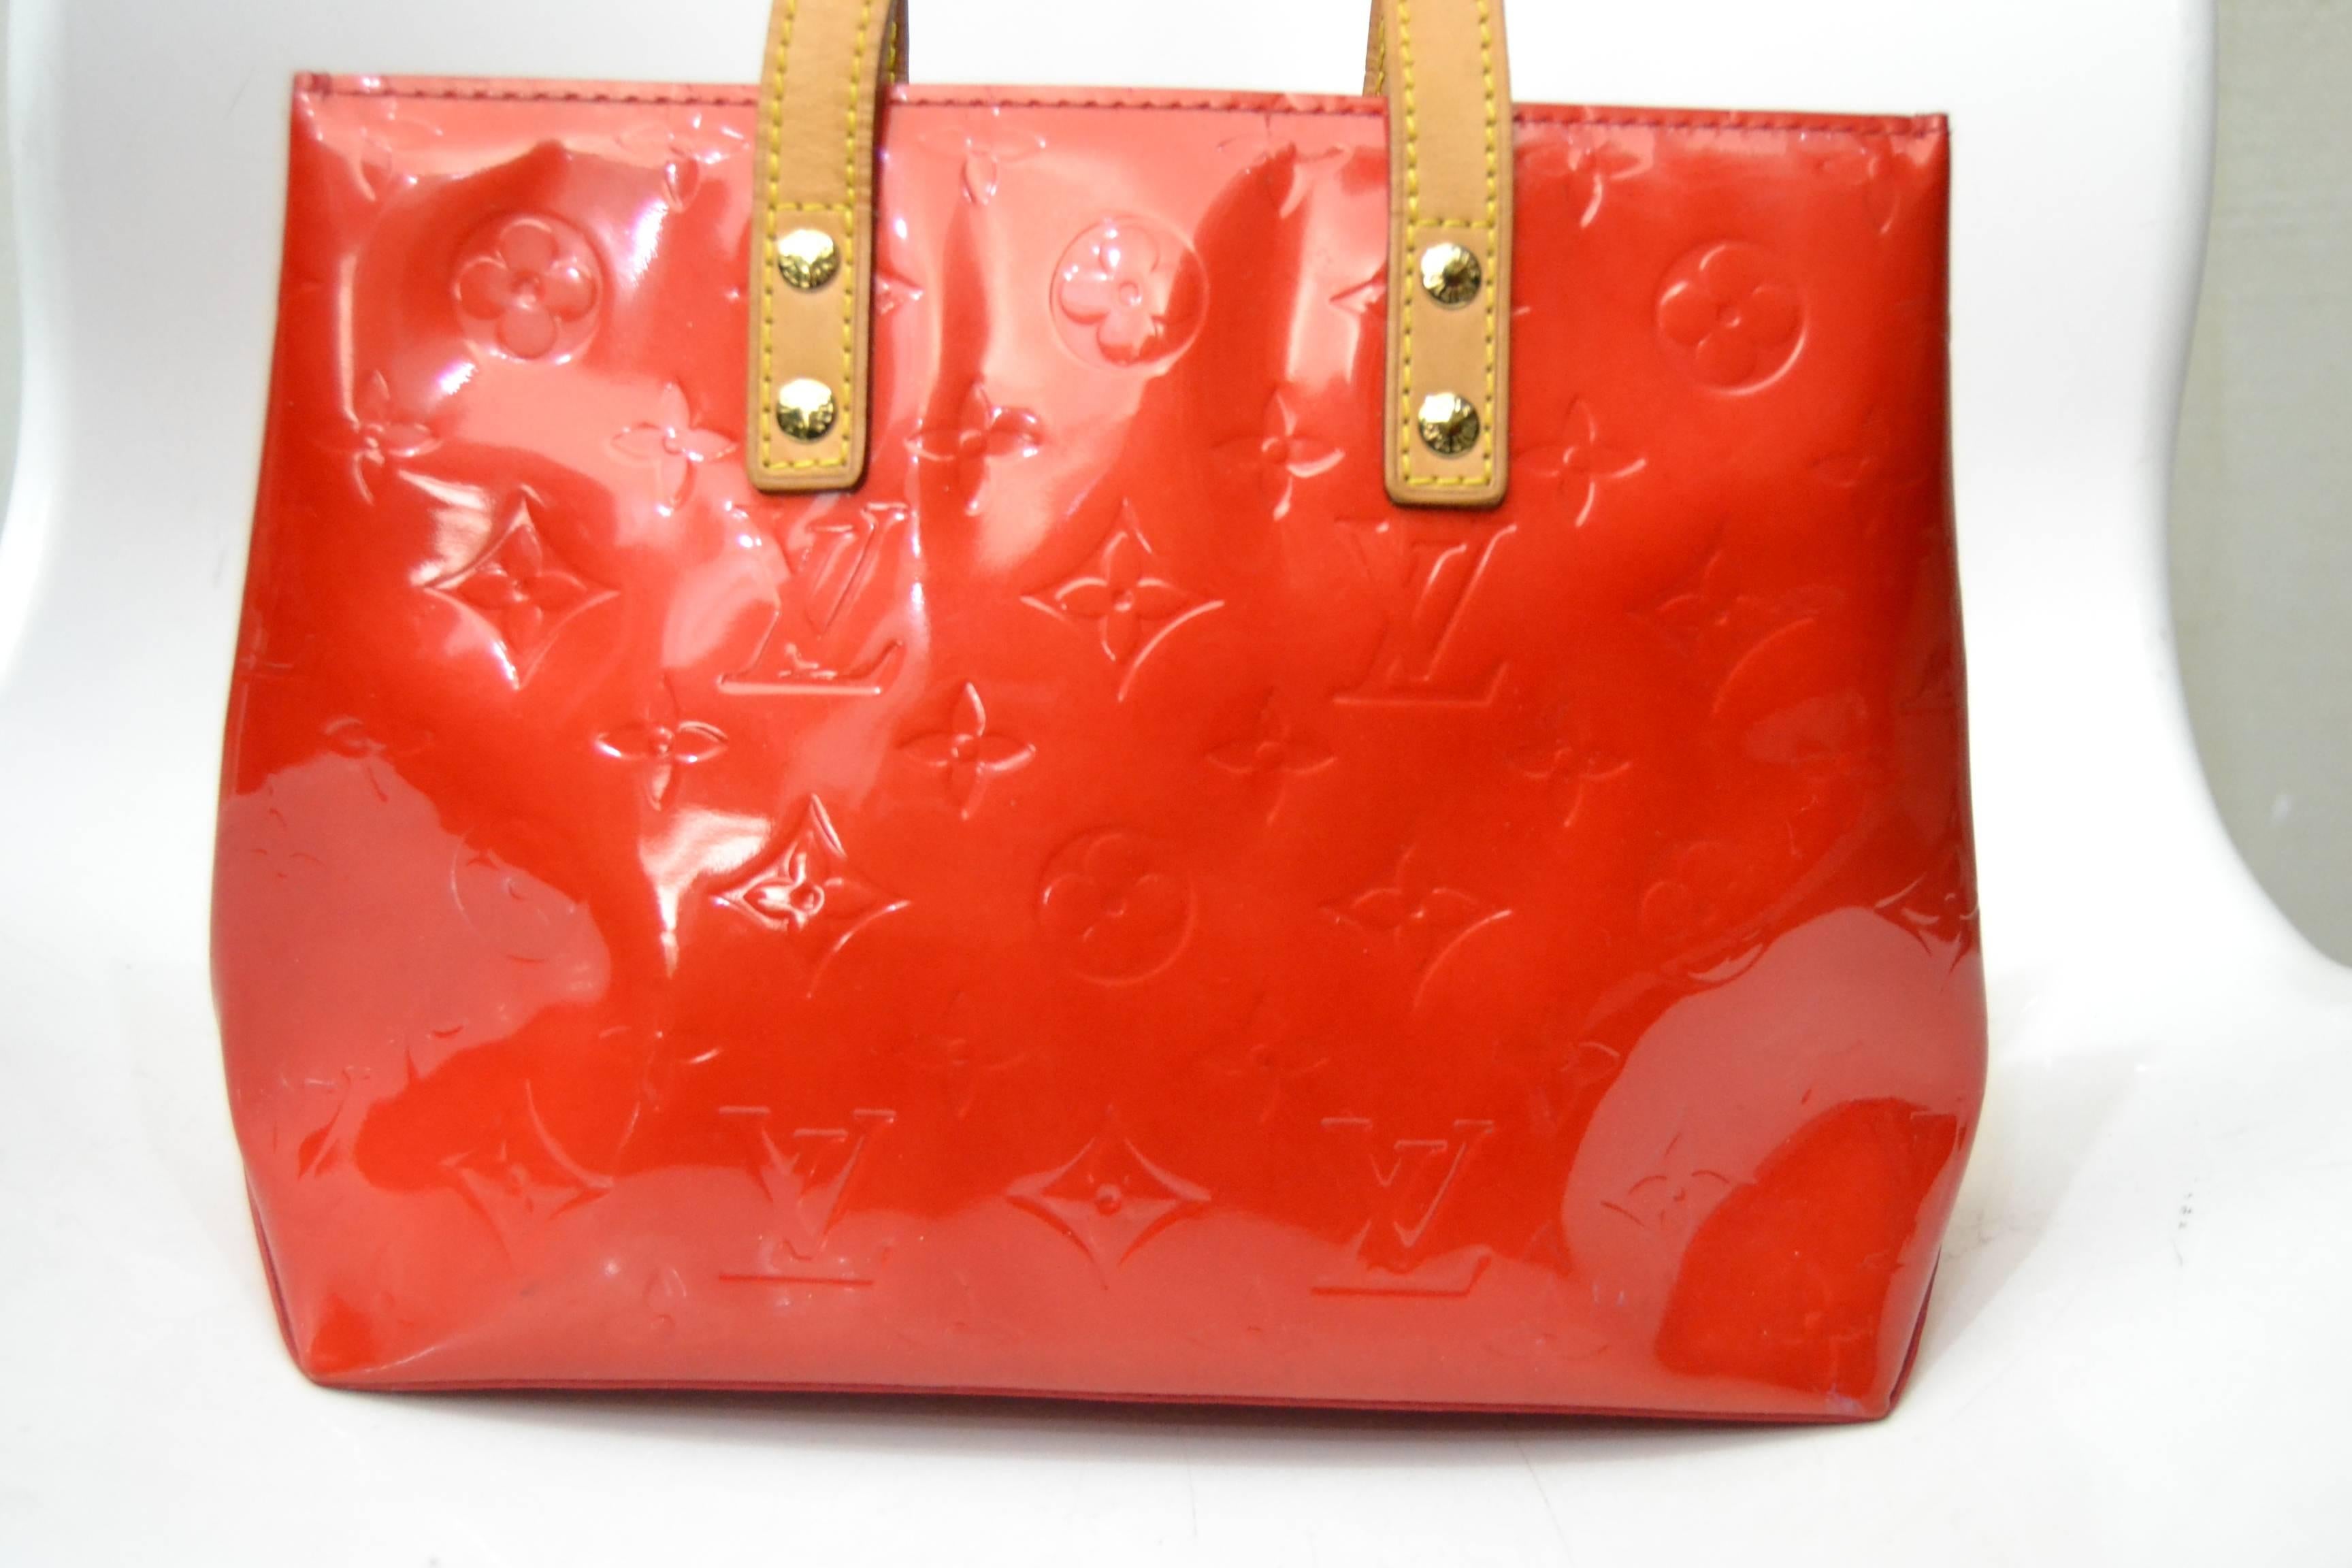 Women's Louis Vuitton Reade PM in Red Vernis leather bag